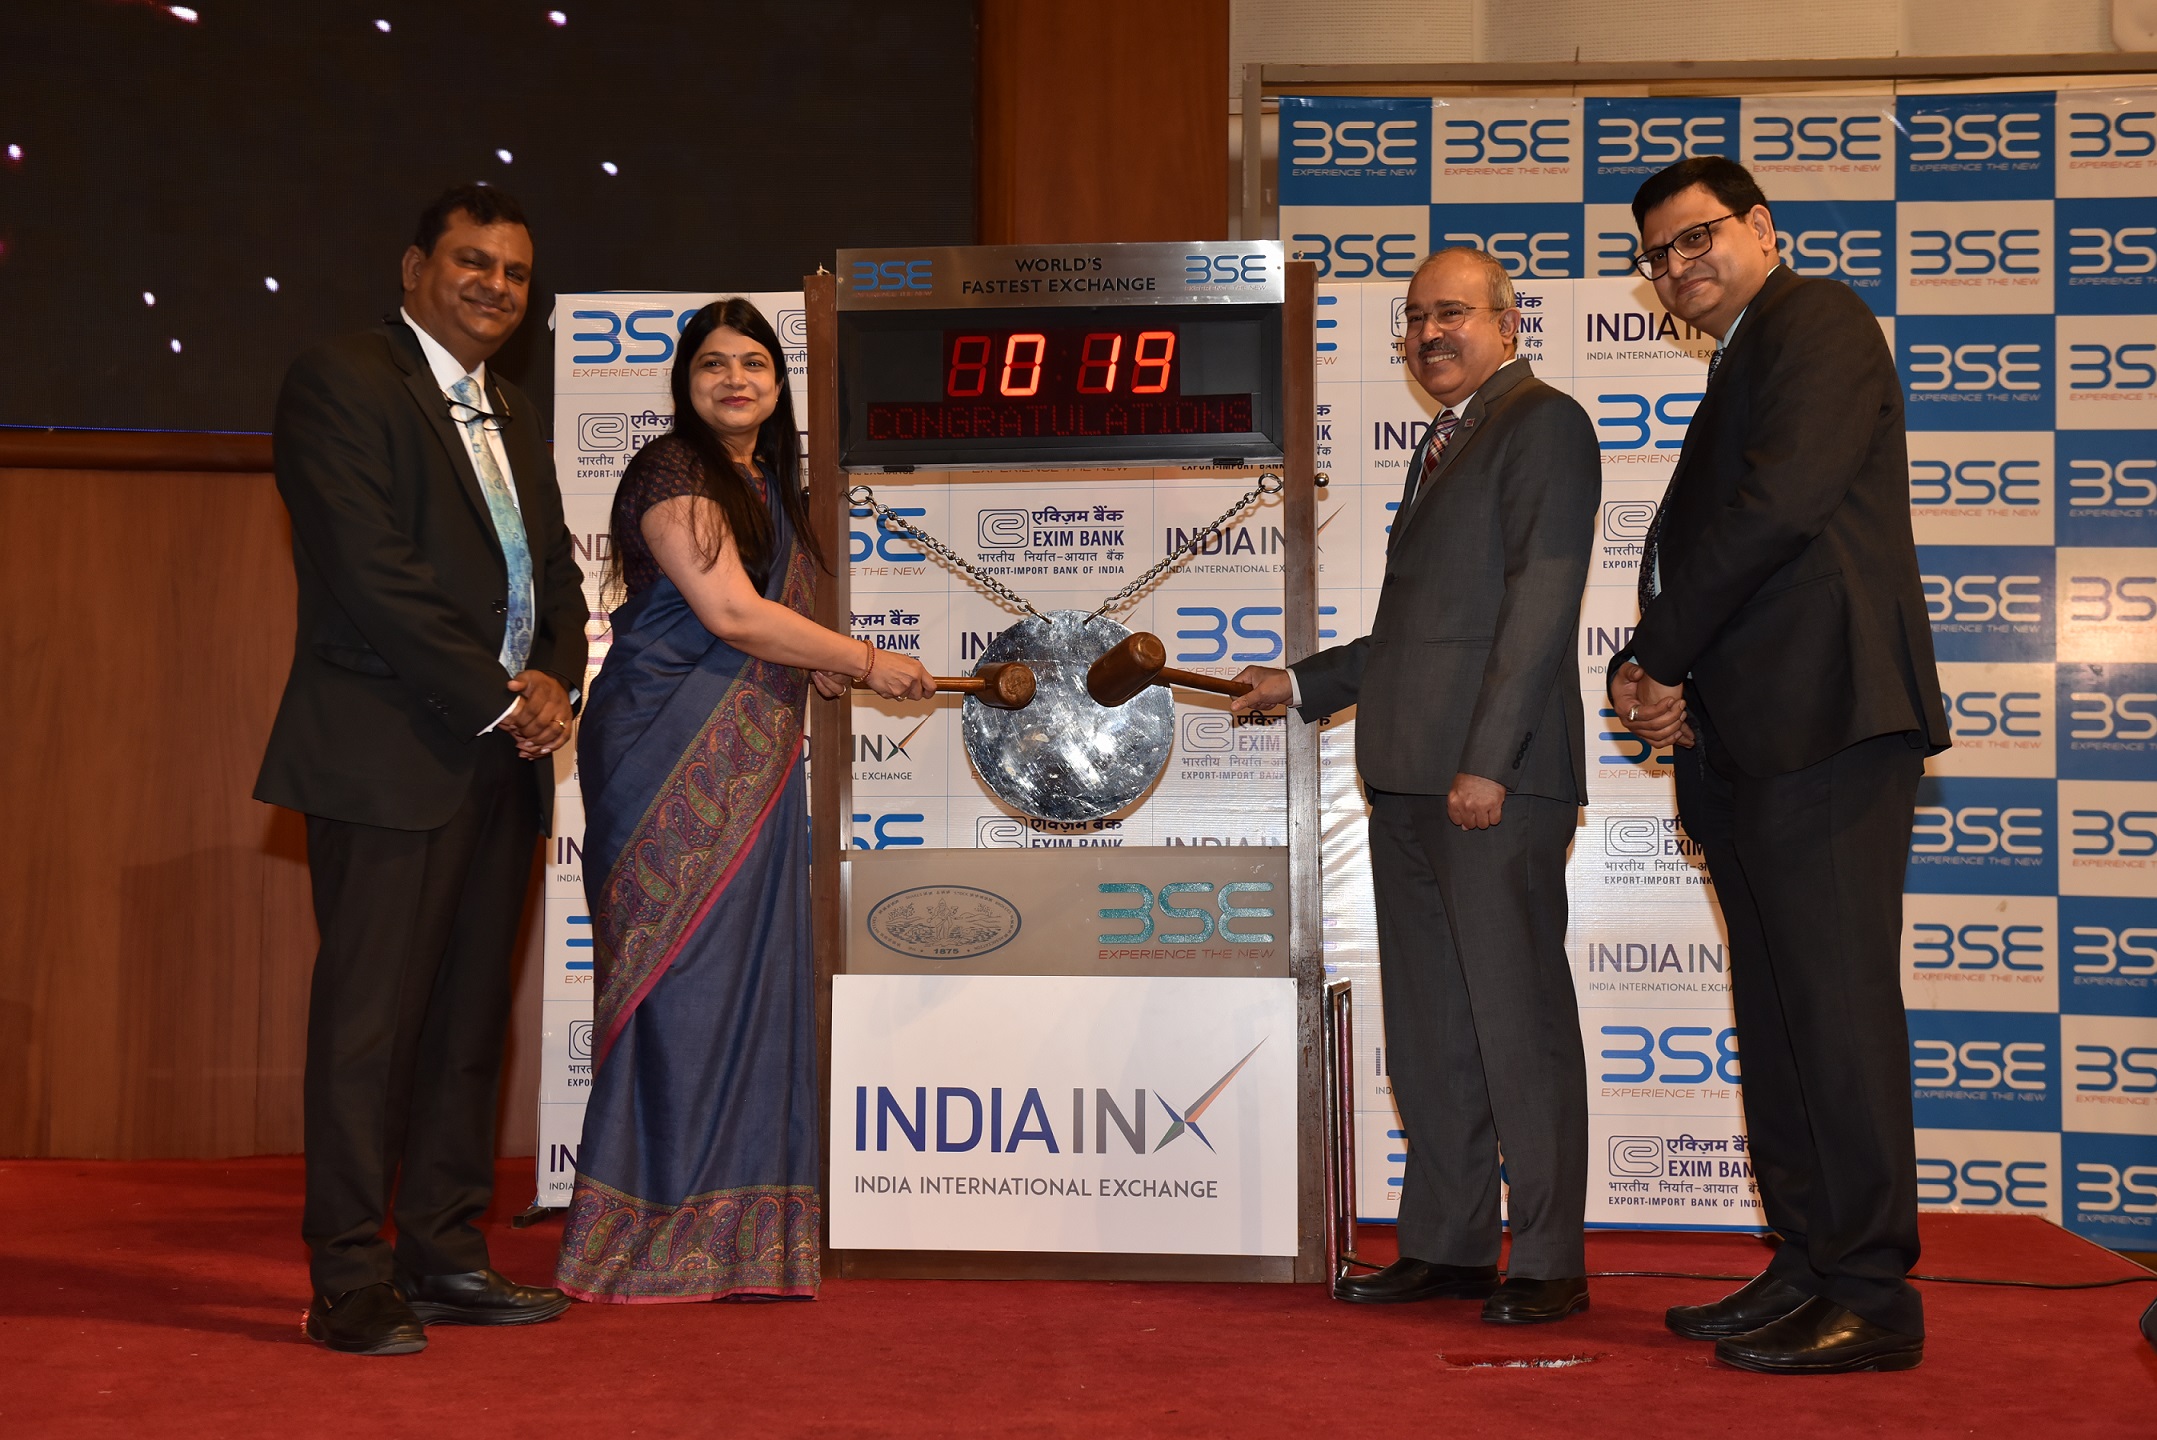 Mr. David Rasquinha, Managing Director, Export-Import Bank of India (2nd from right) and Ms. Harsha Bangari, Chief General Manager, Export-Import Bank of India, at the bell ringing ceremony for USD 1 billion bond issuance, in presence Shri V. Balasubramaniam, MD & CEO, India International Exchange-Photo By Sachin Murdeshwar GPN